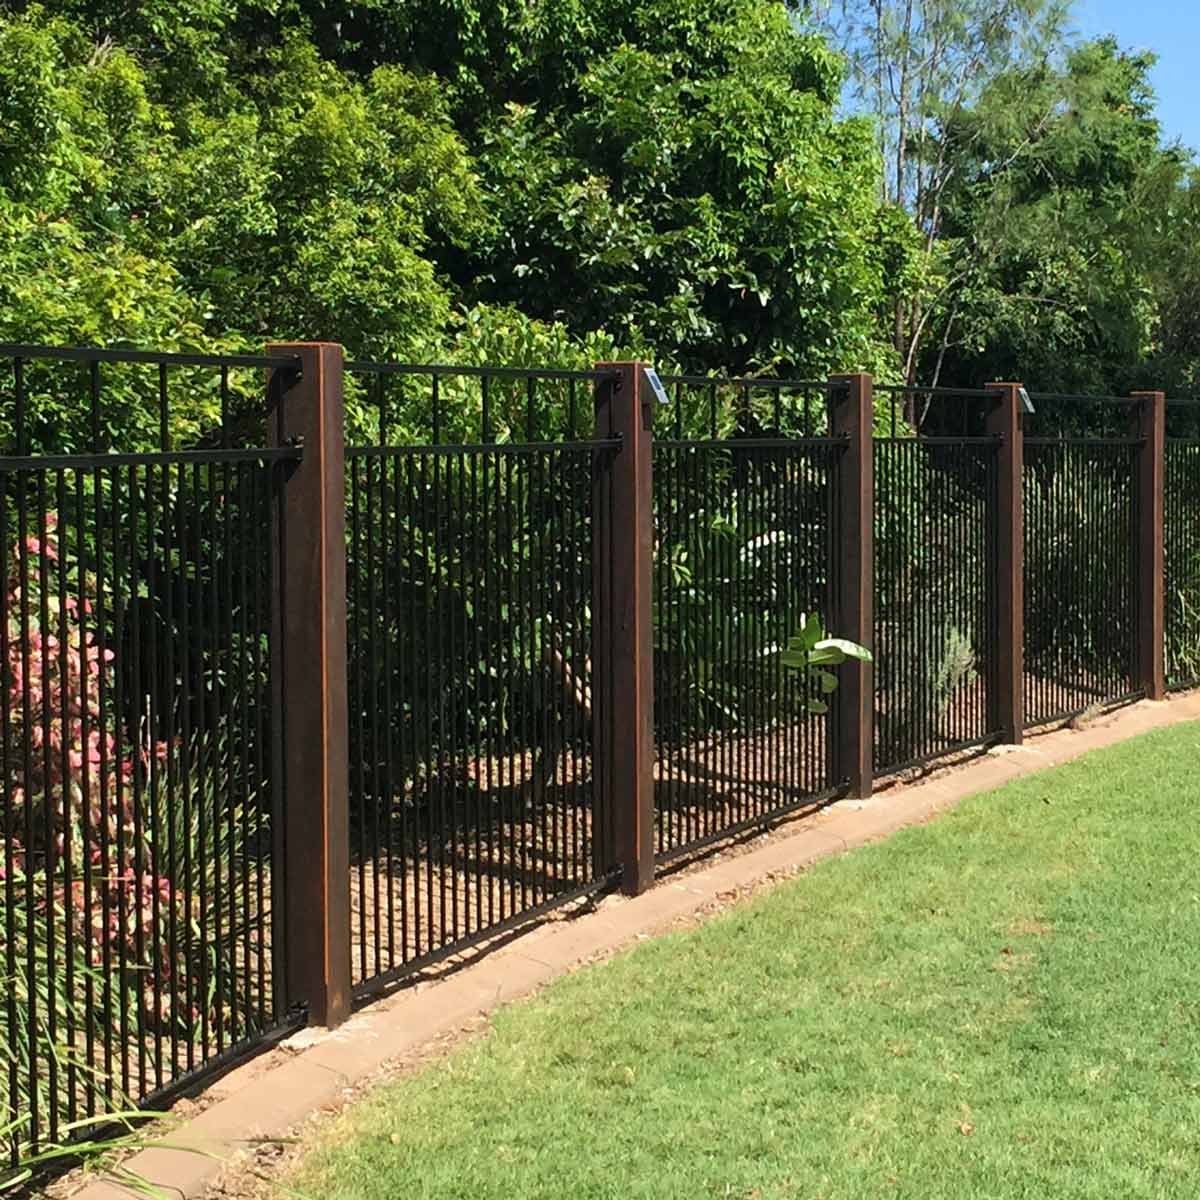 6 Fascinating Ideas For Decorating Garden Fence